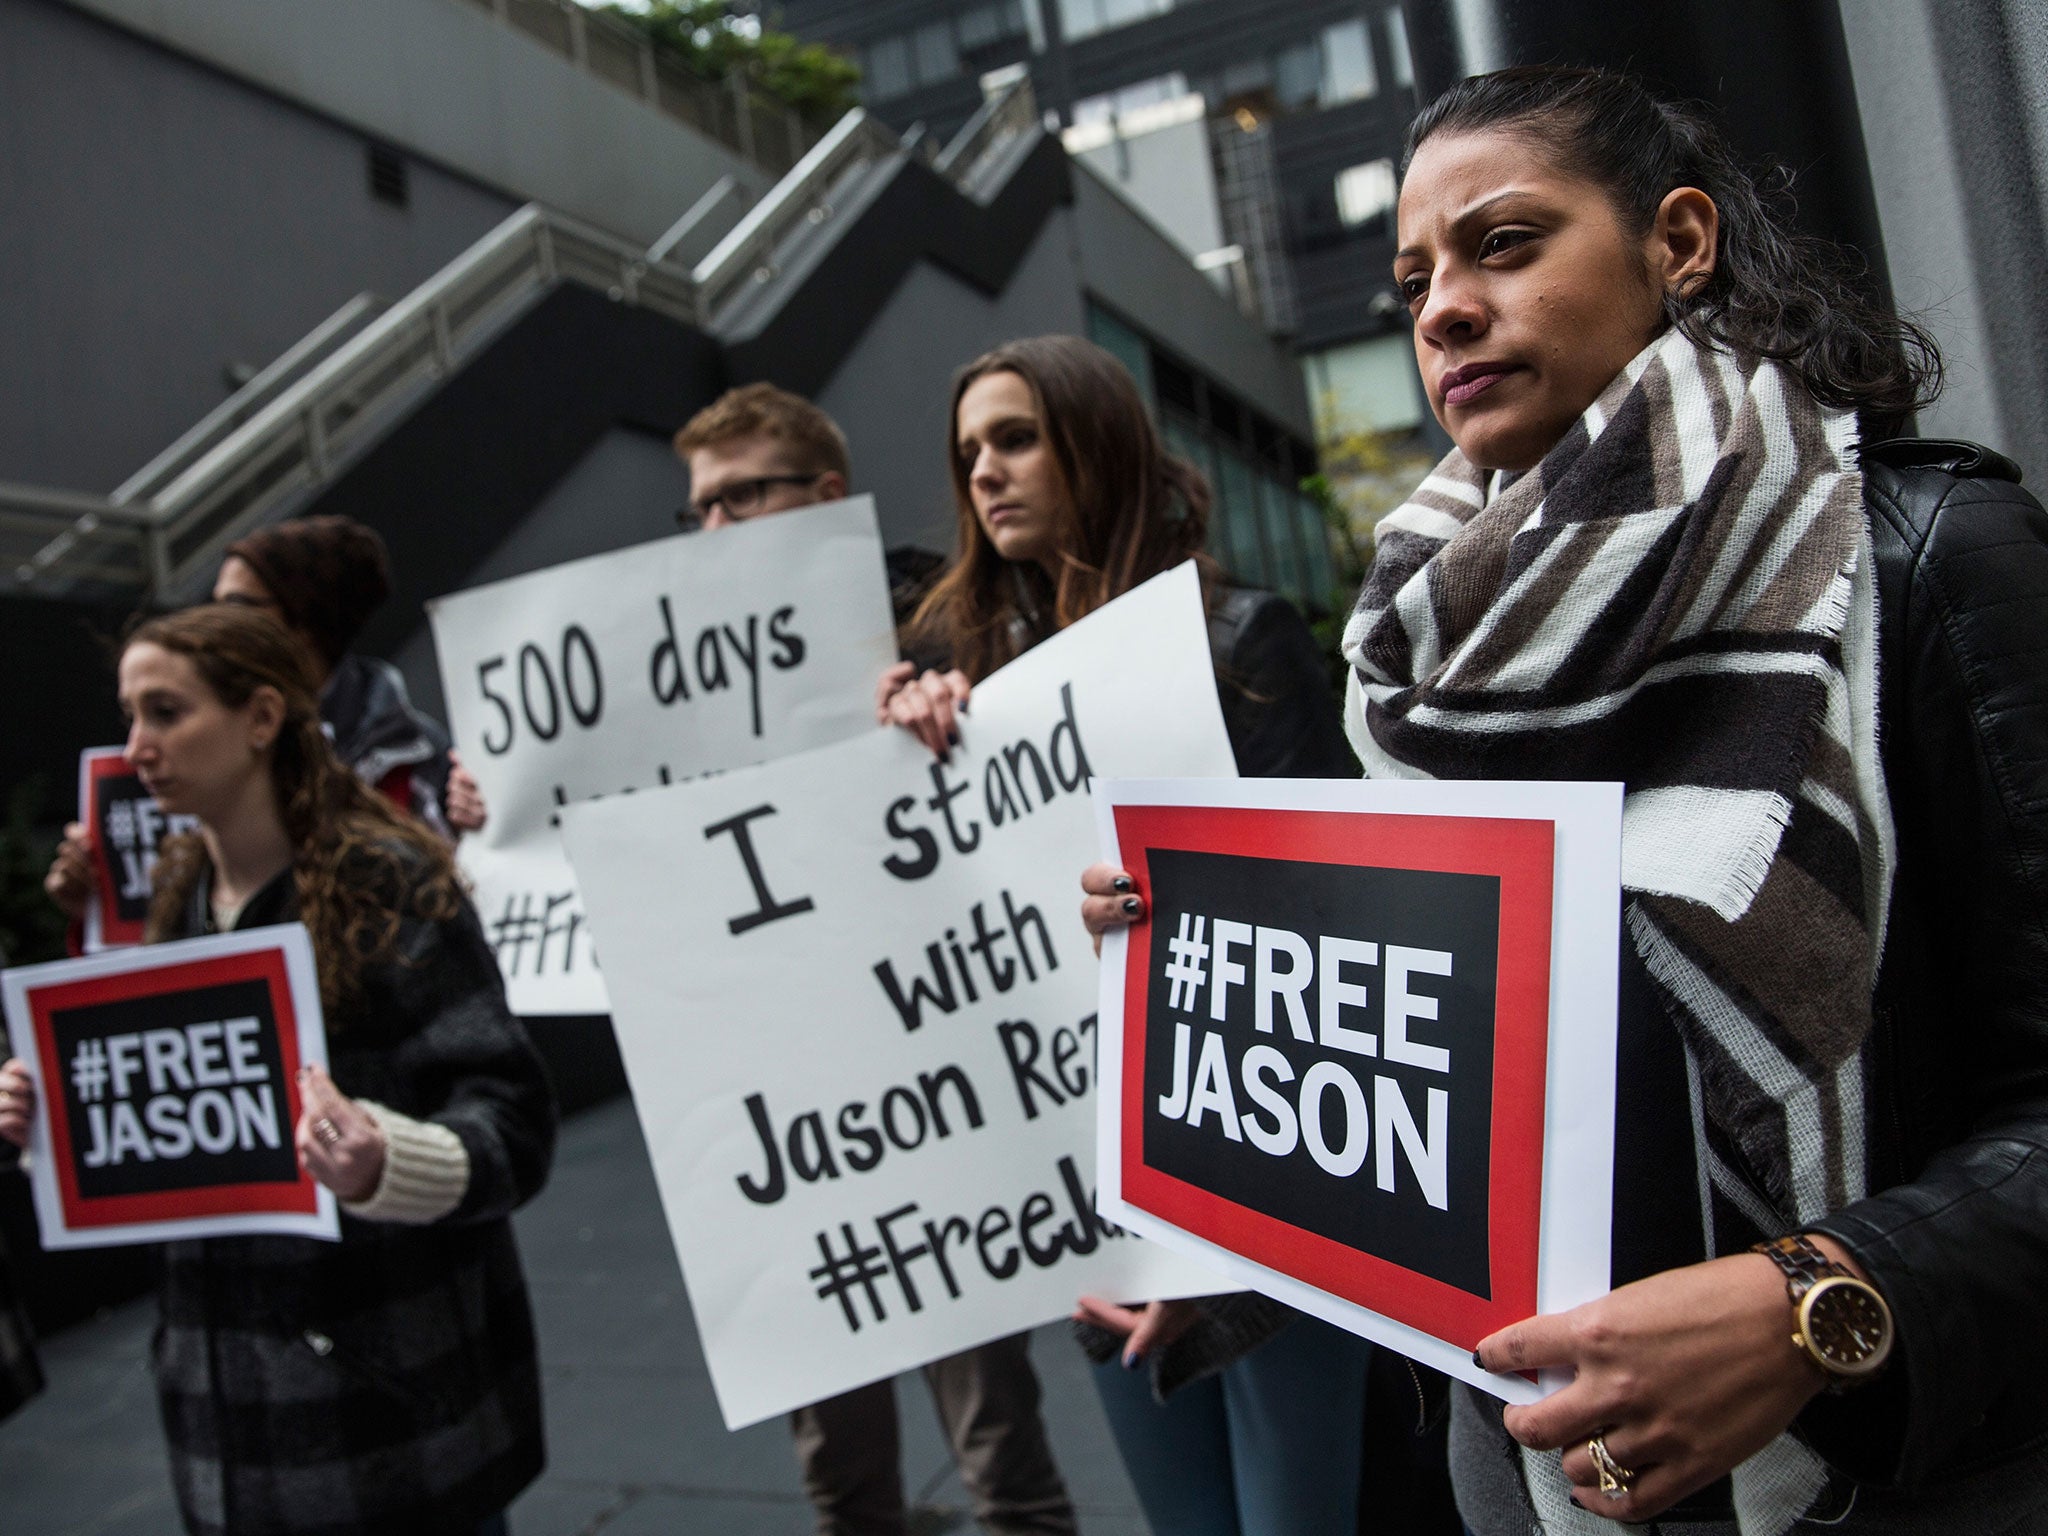 Supporters protest calling for Jason Rezaian's immediate release on December 3, 2015 in New York City.